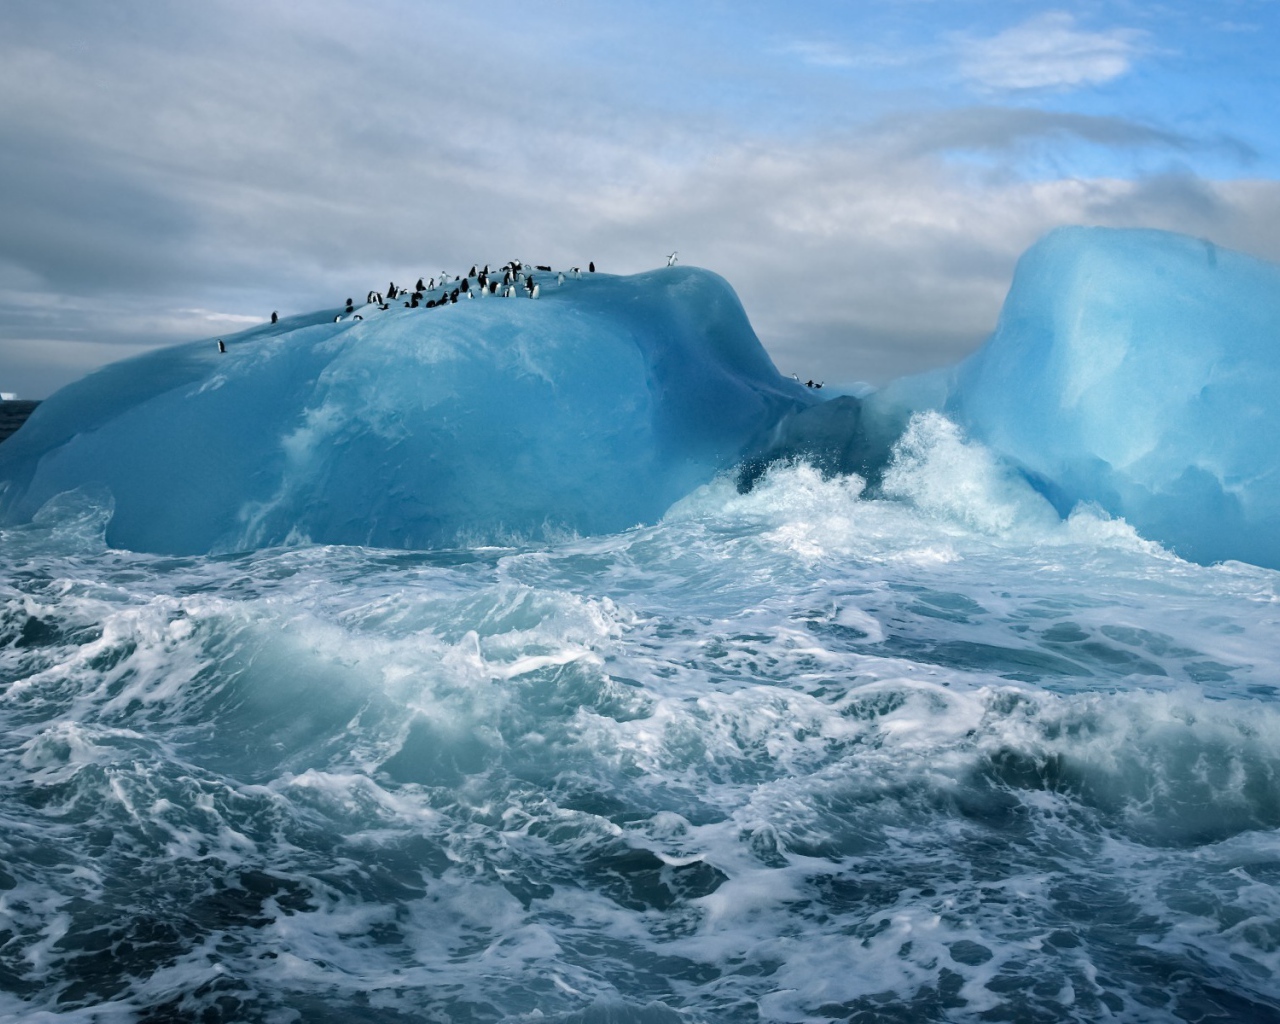 Penguins on an iceberg in the stormy sea